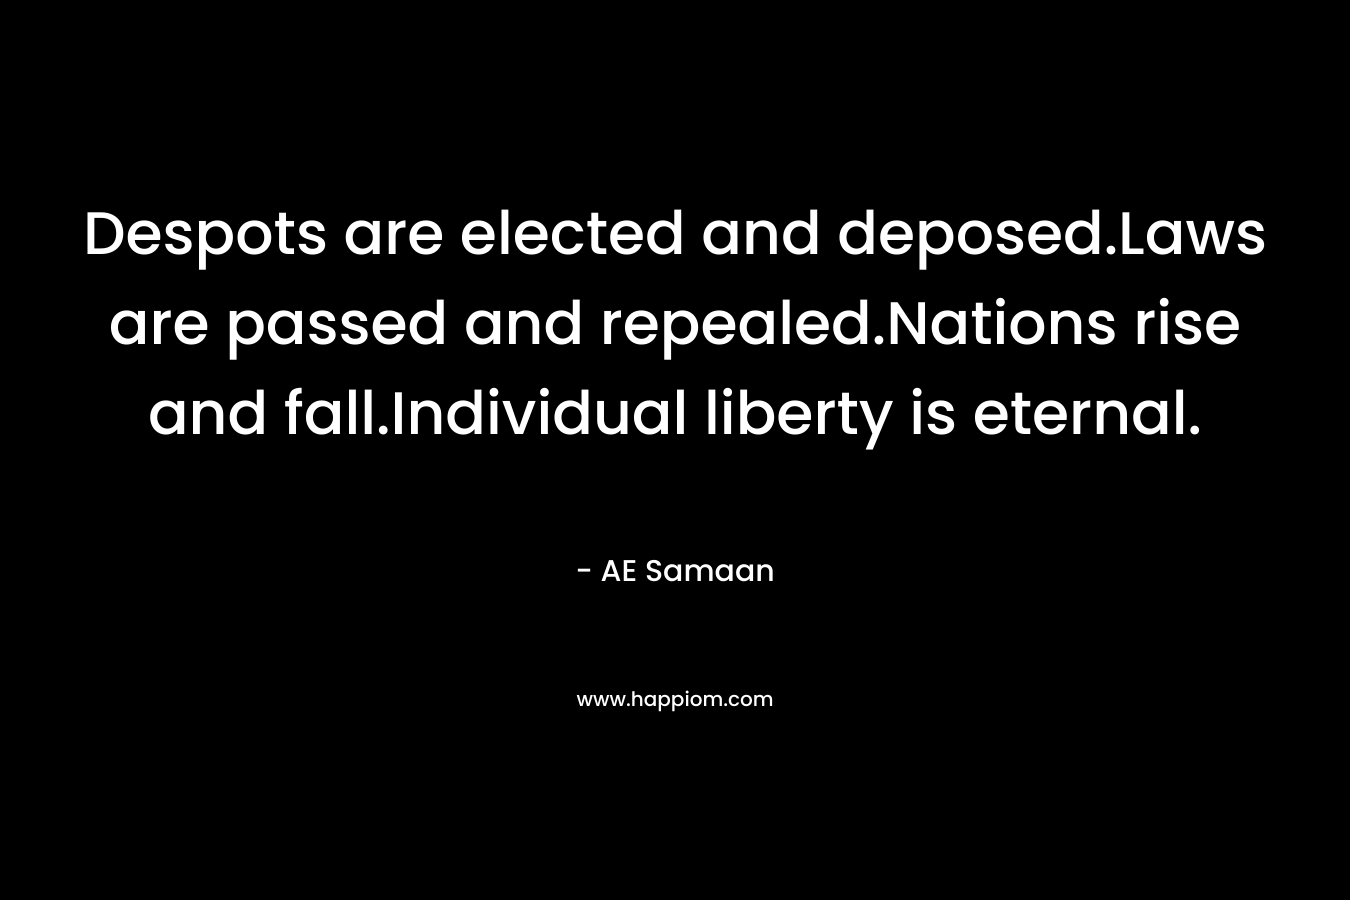 Despots are elected and deposed.Laws are passed and repealed.Nations rise and fall.Individual liberty is eternal. – AE Samaan